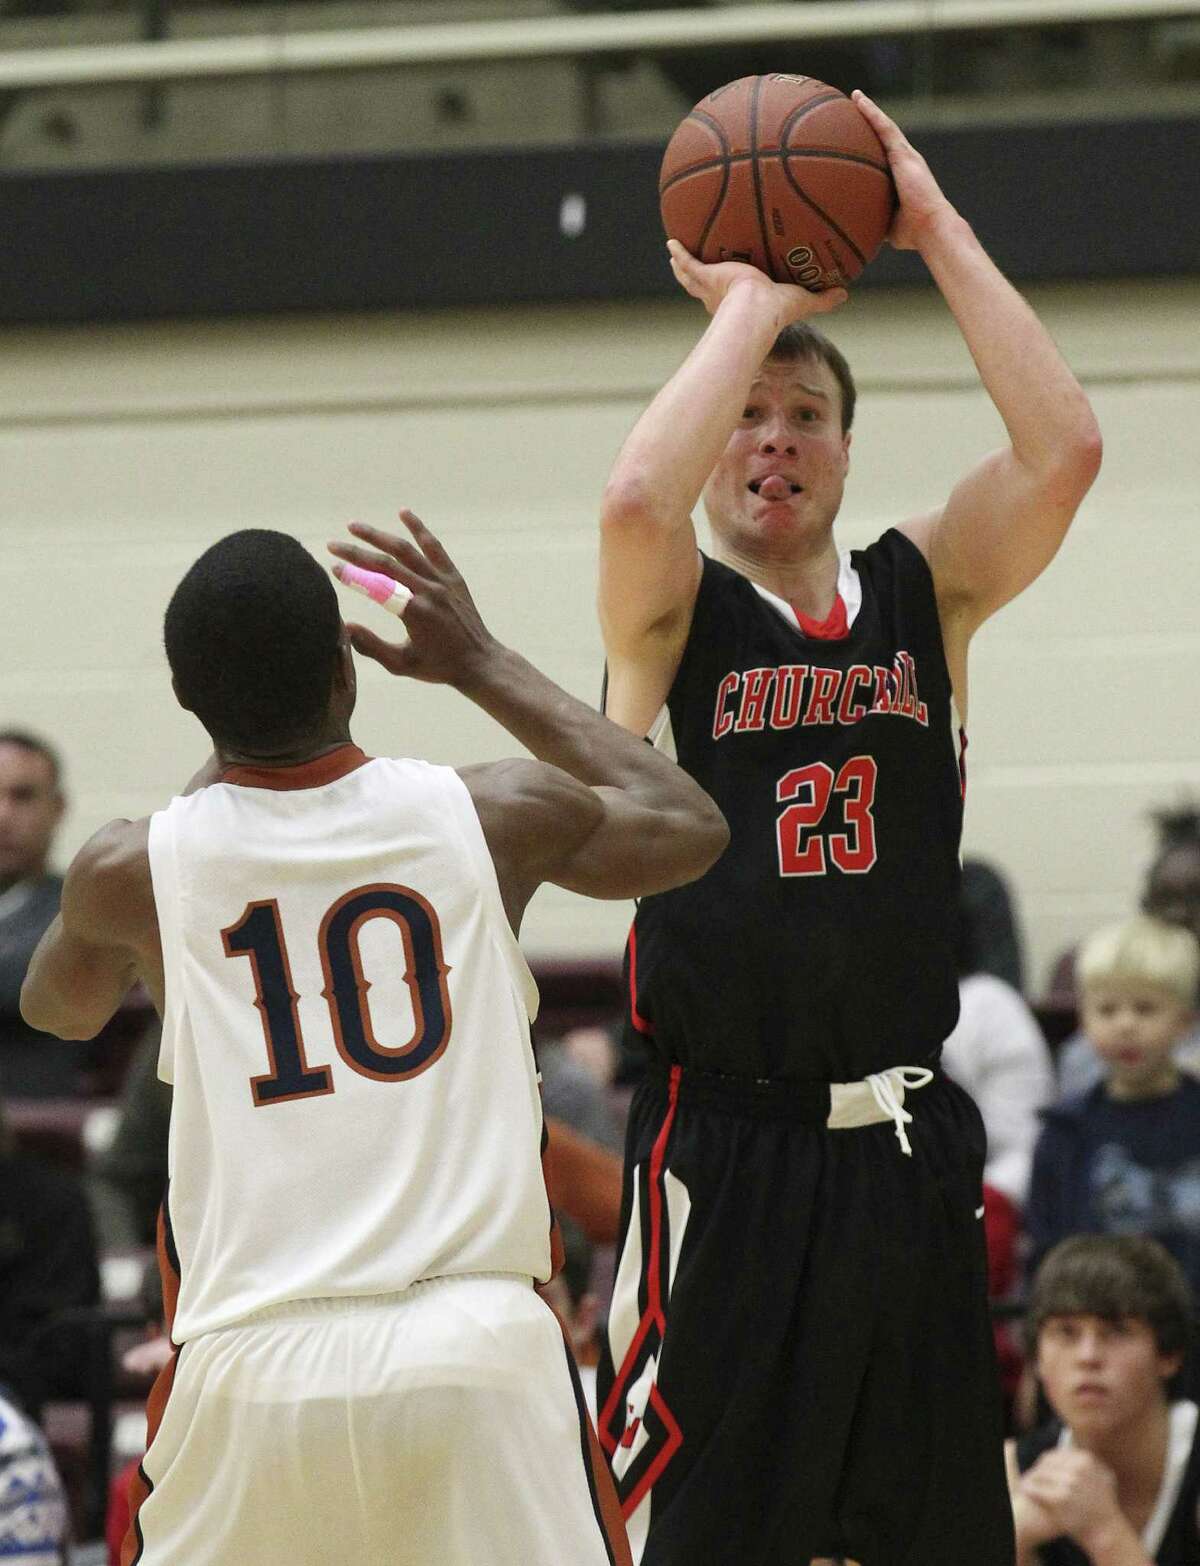 Churchill guard Ben Mammel is the city's second-leading scorer at 18.6 points per game.